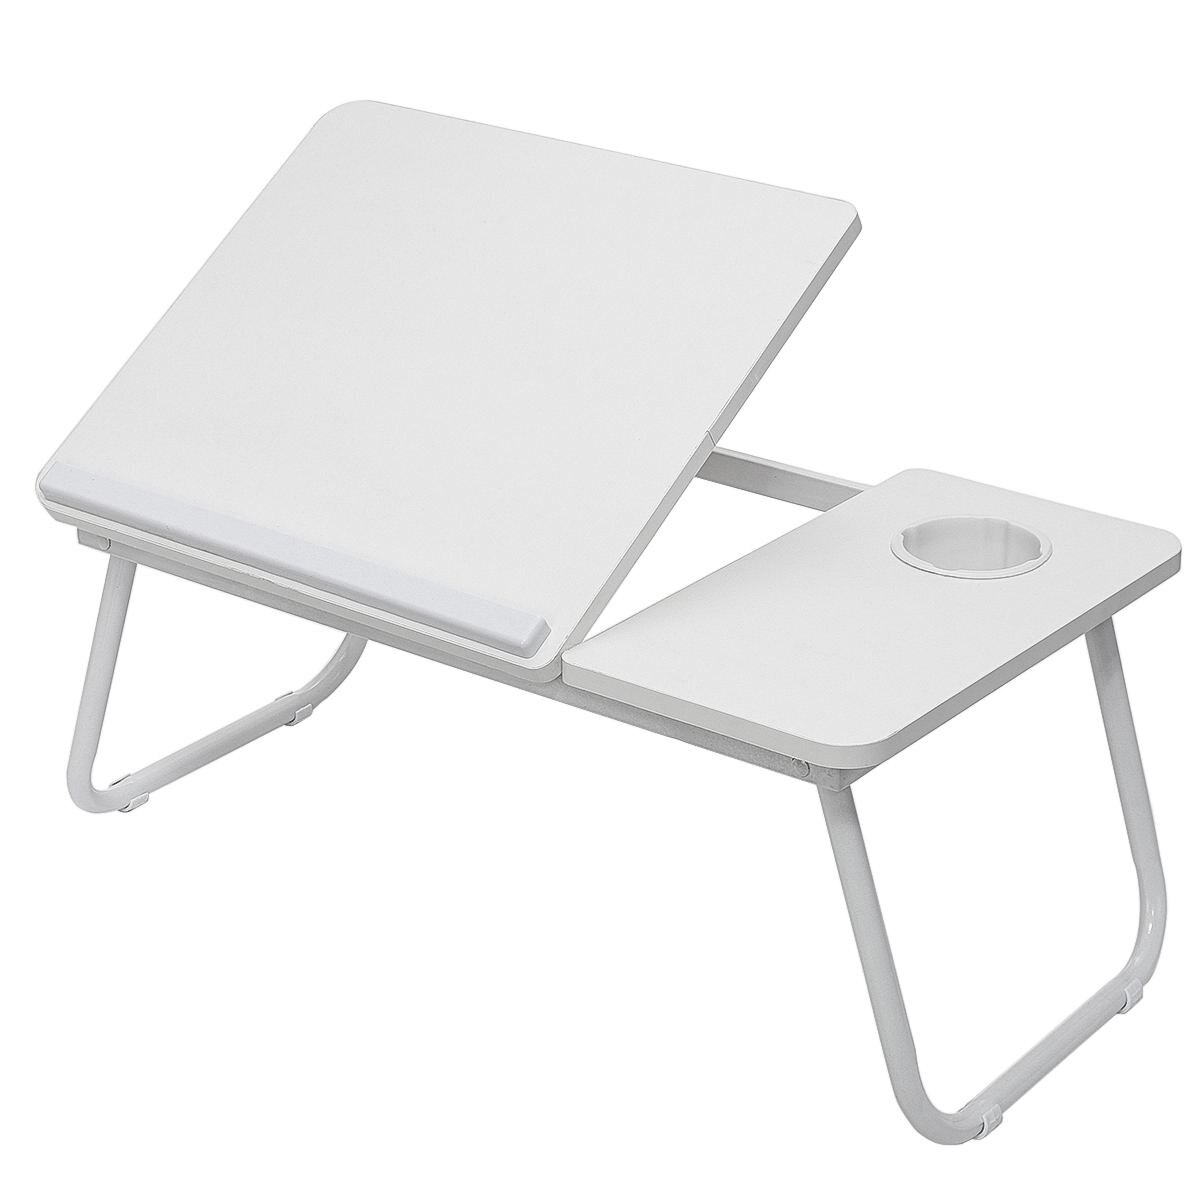 Adjustable Folding Laptop Table Notebook Desk Breakfast Serving Bed Trays Foldable Computer Desk Stand Lazy Bed Tray: white